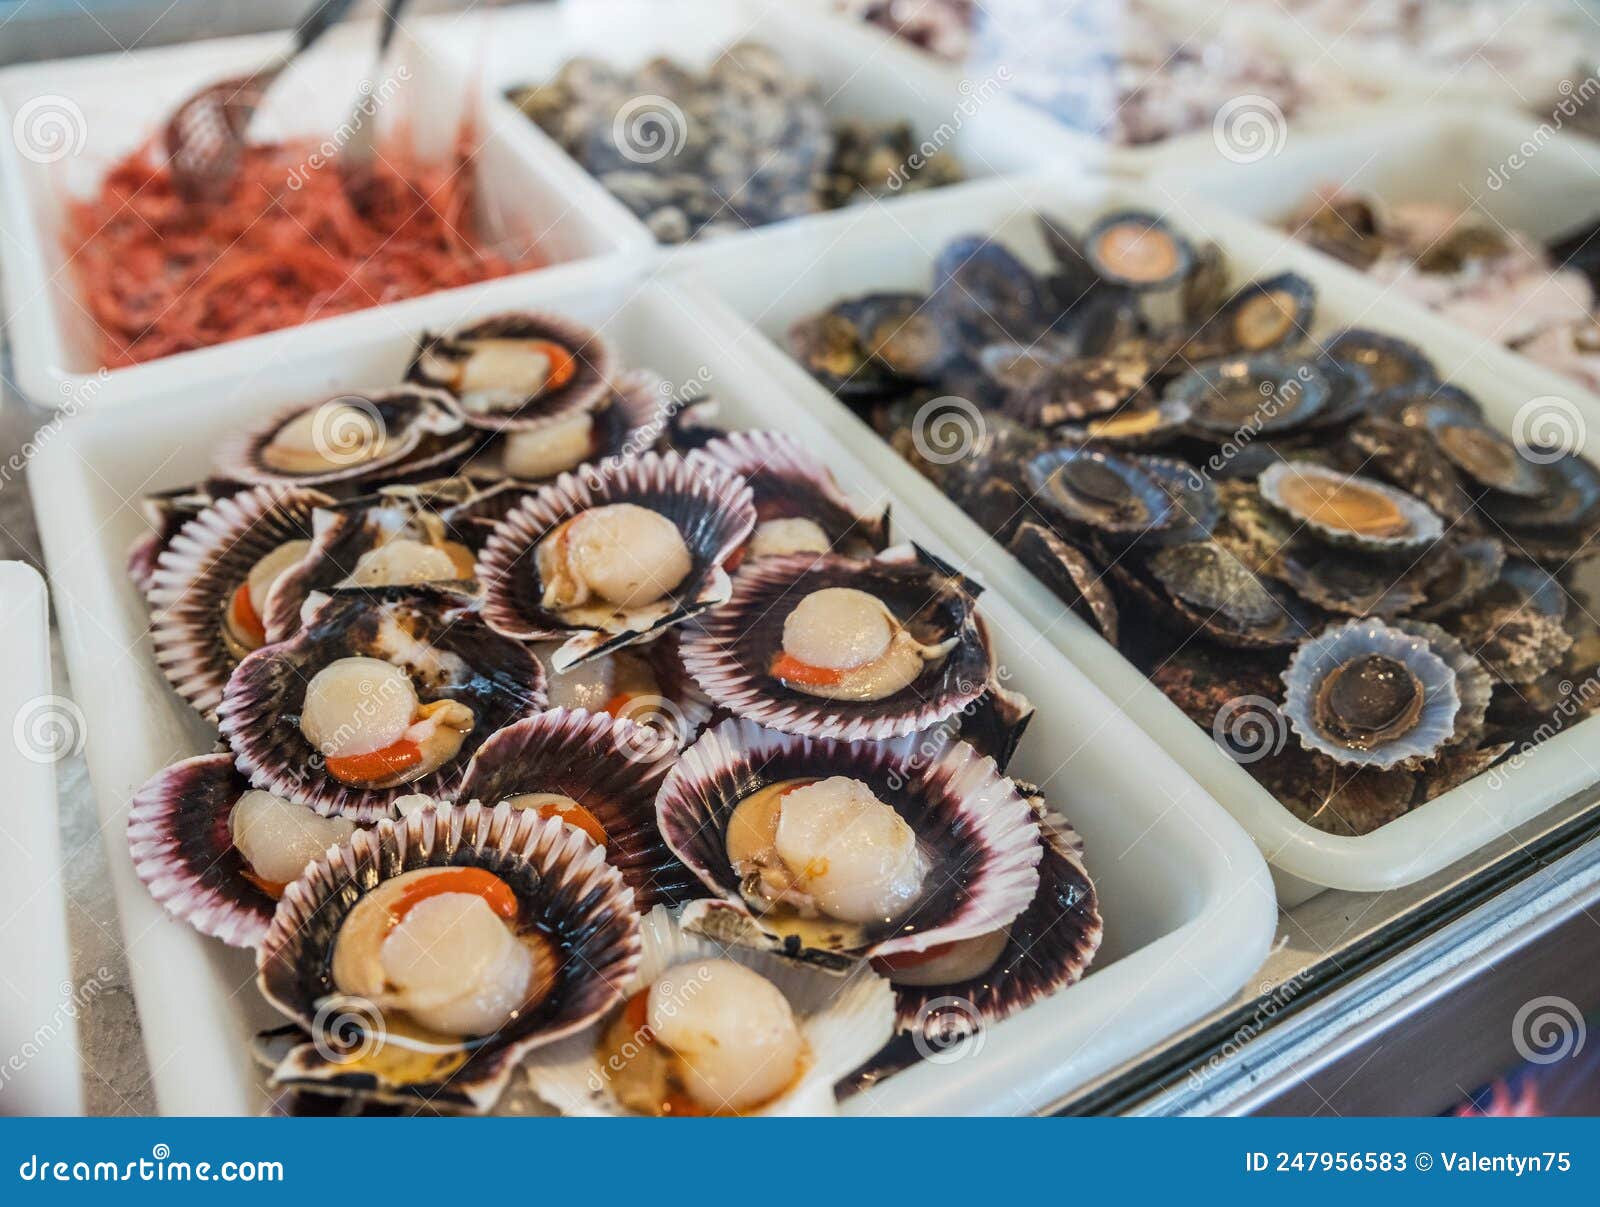 raw `lapas` or true limpets - traditional seafood of tenerife and madeira islands